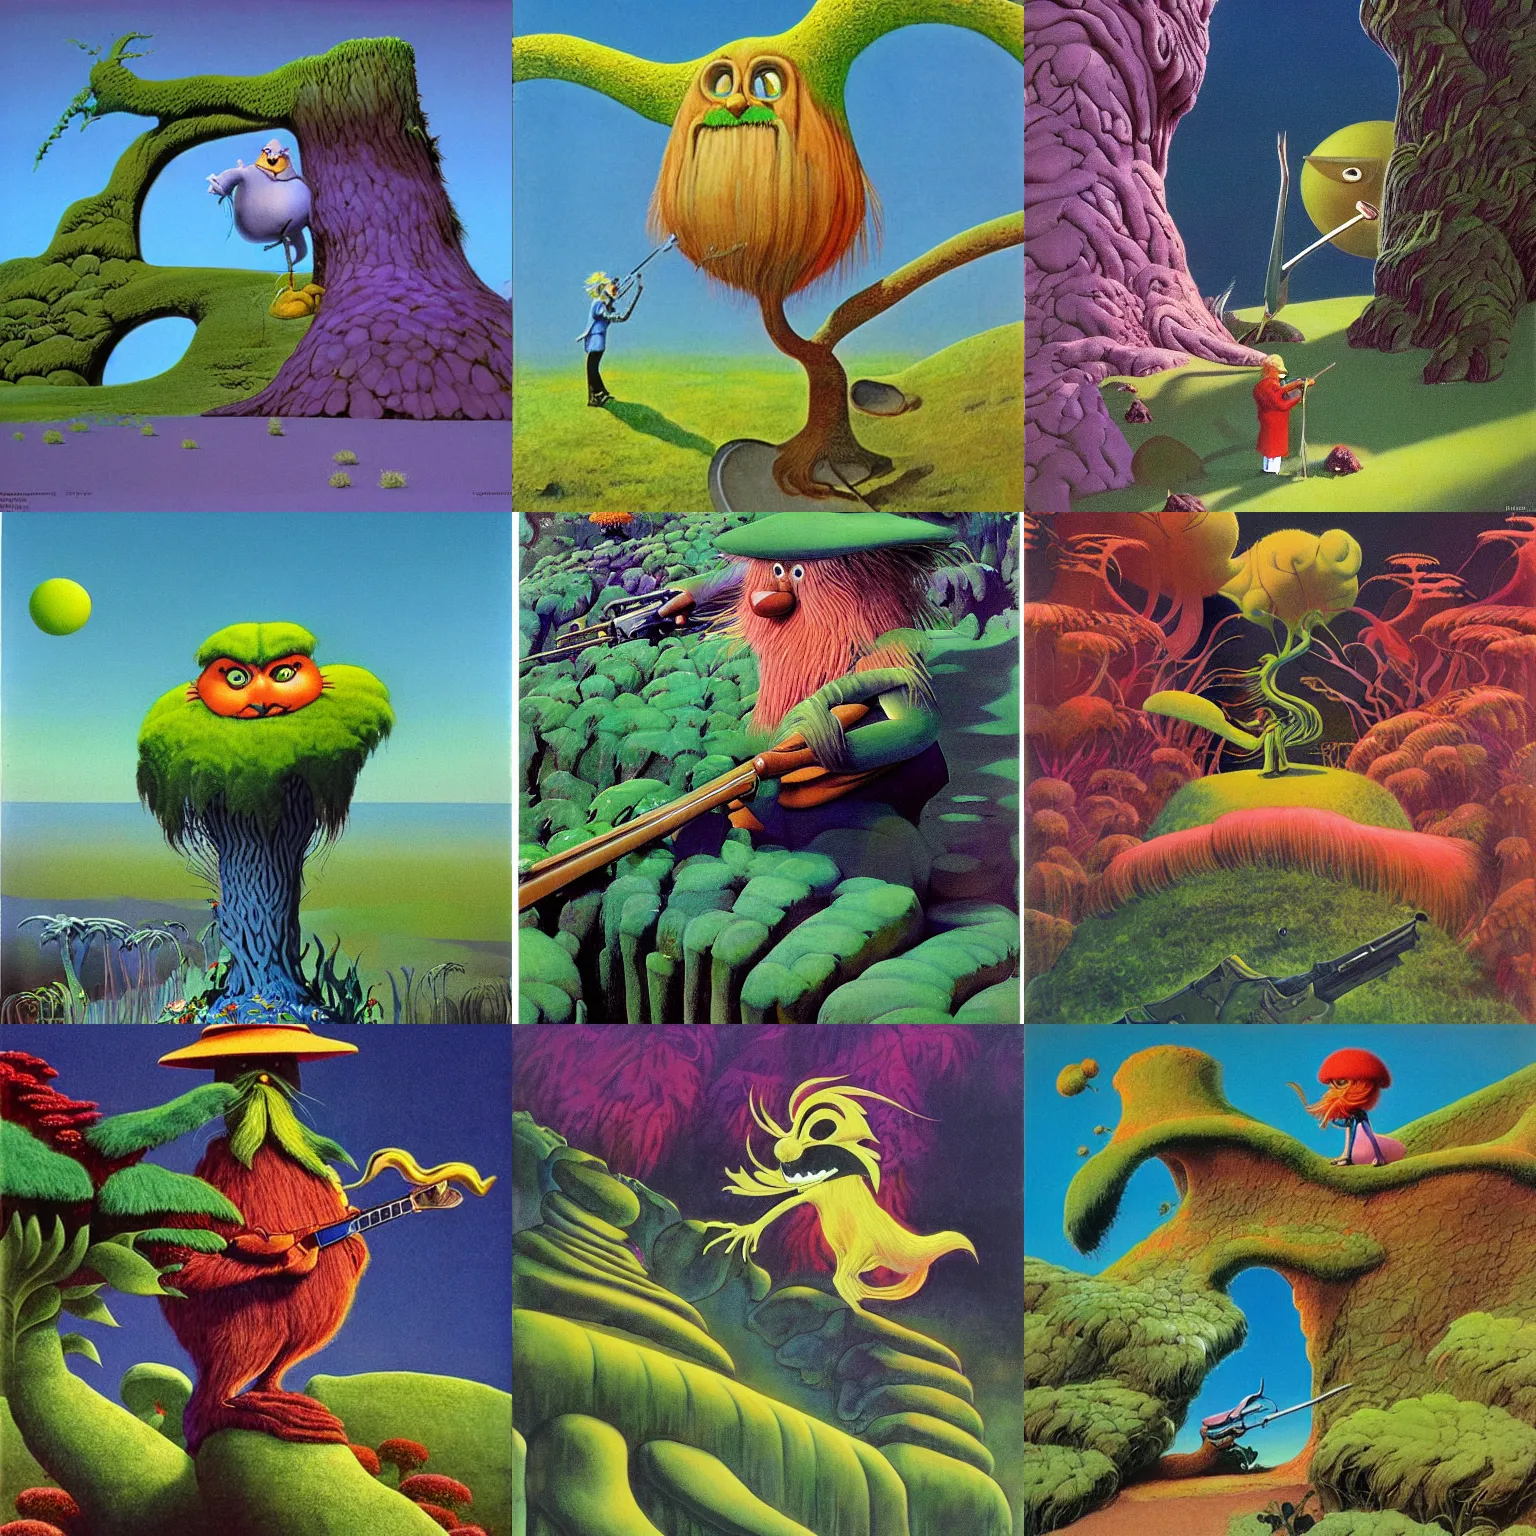 Prompt: art by roger dean. lorax with automatic riffle